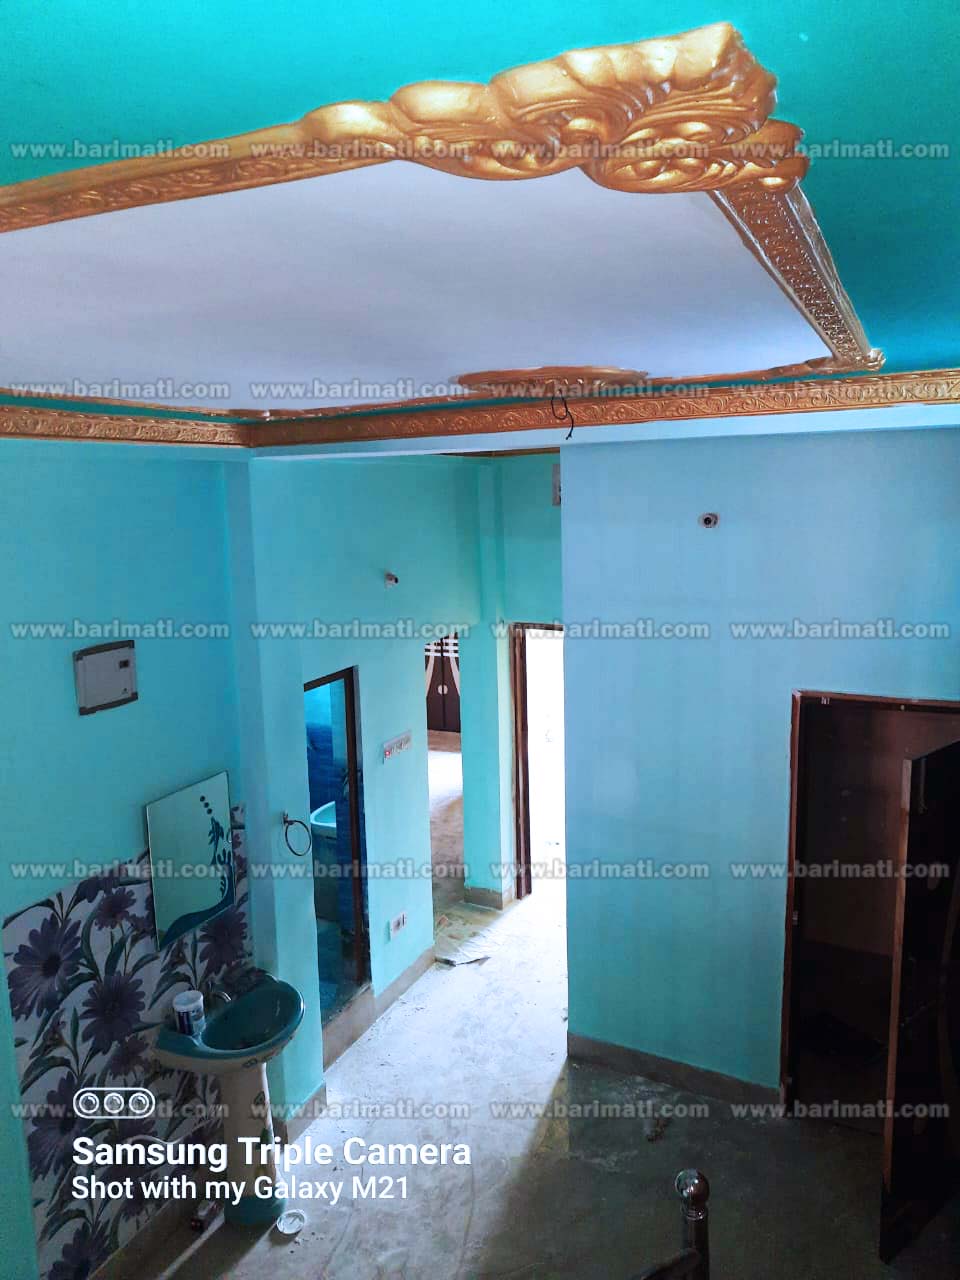 Budget-friendly 2 BHK house for rent in Kankar Bag Ram Lakhan Path, Patna, under 12000 per month